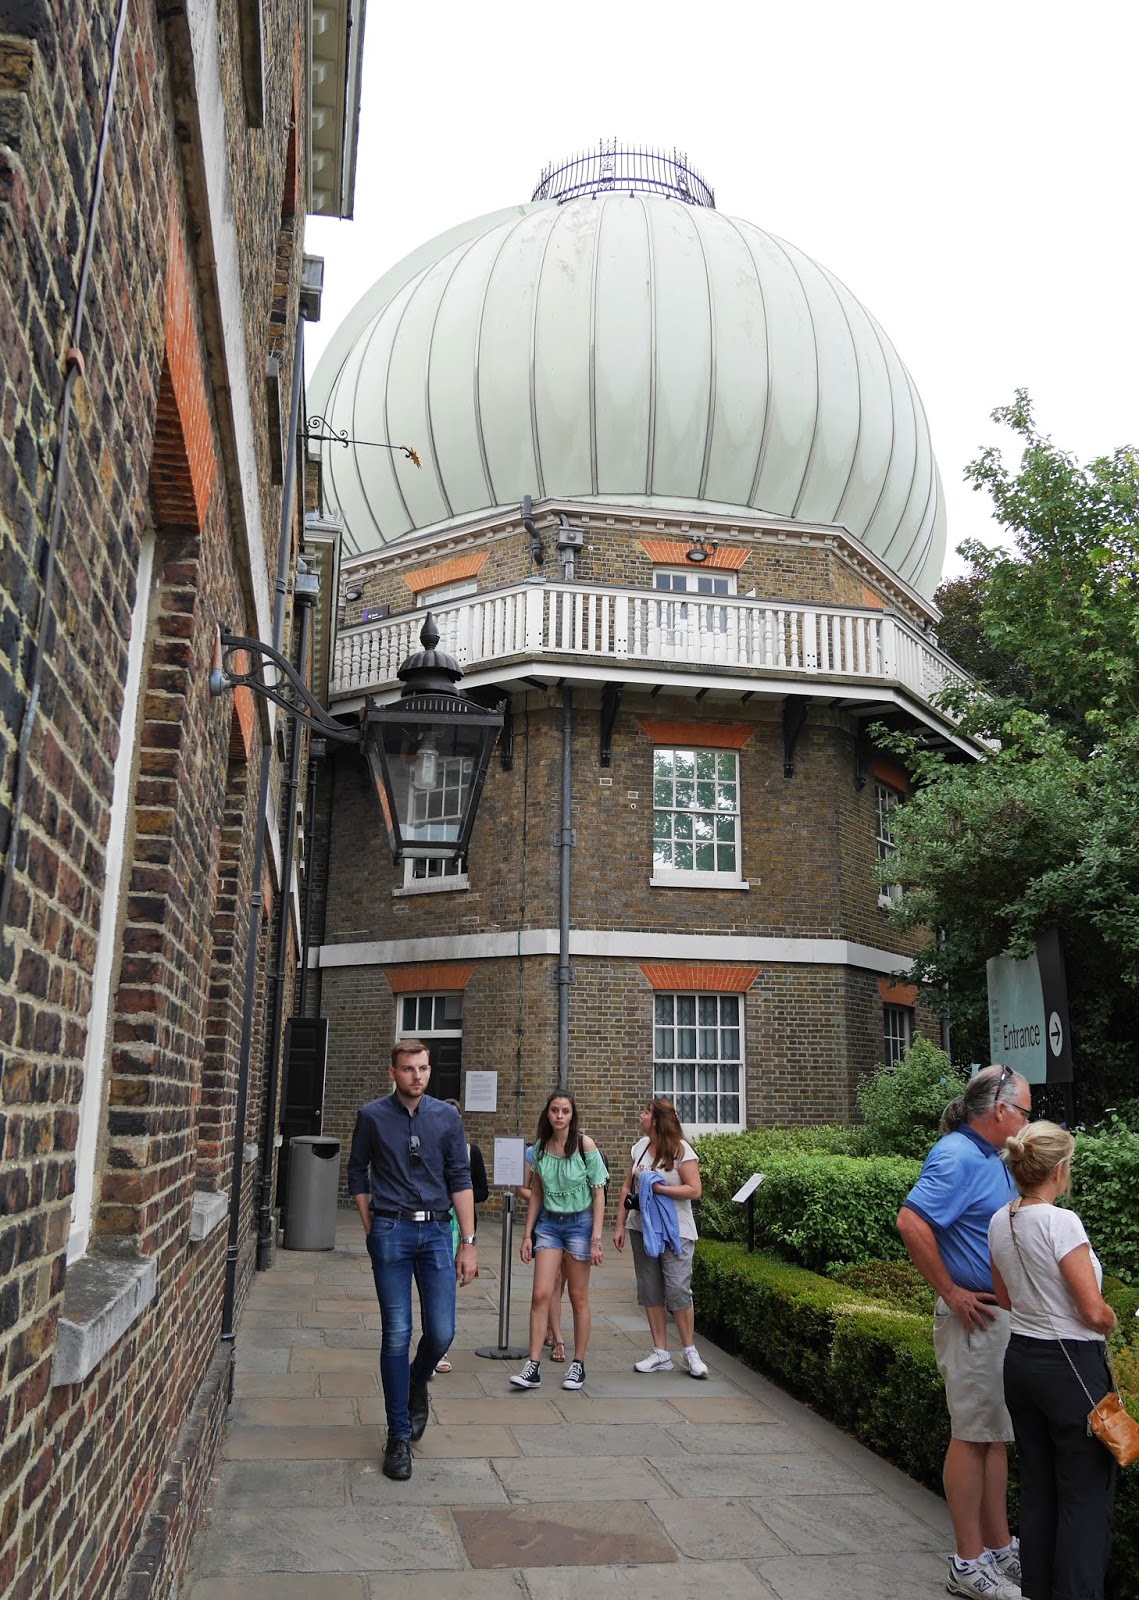 The Royal Observatory in Greenwich, London